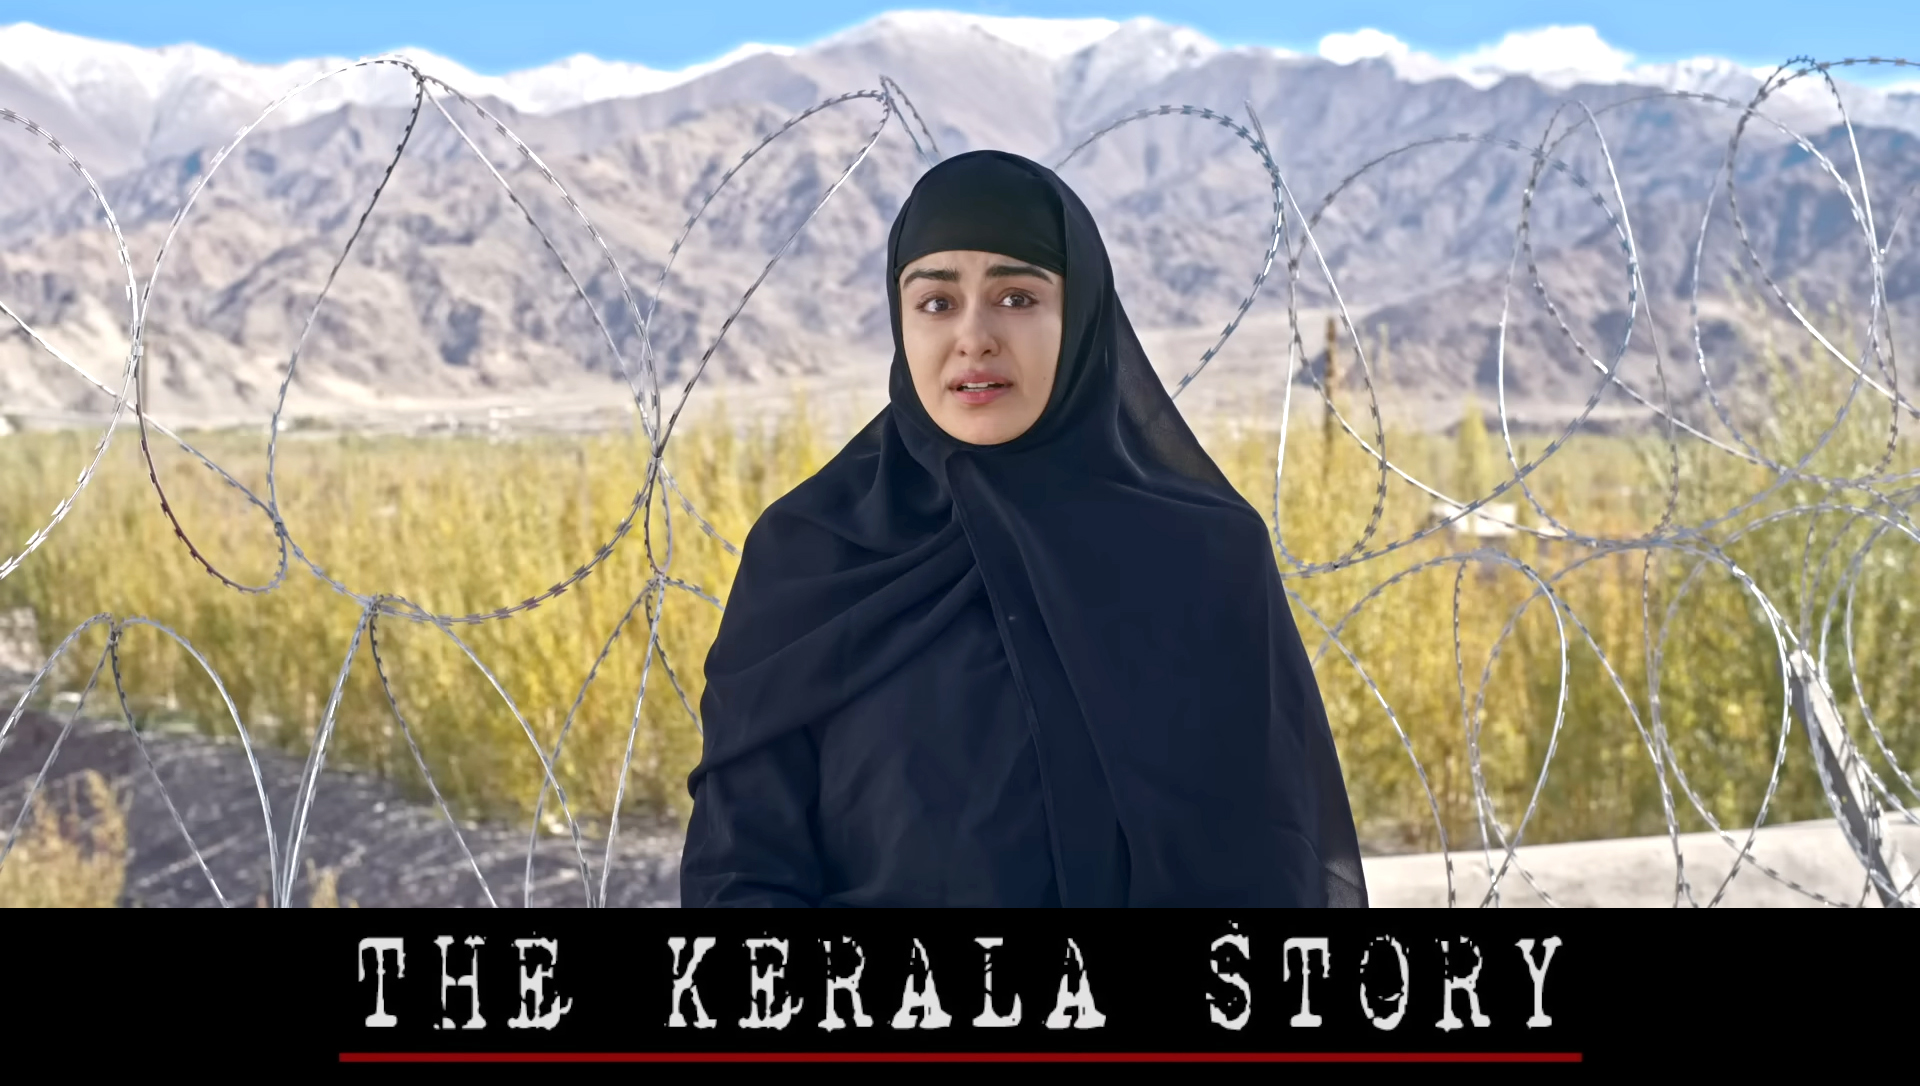 Teaser of 'The Kerala story' released, talks about 32000 women who joined  ISIS